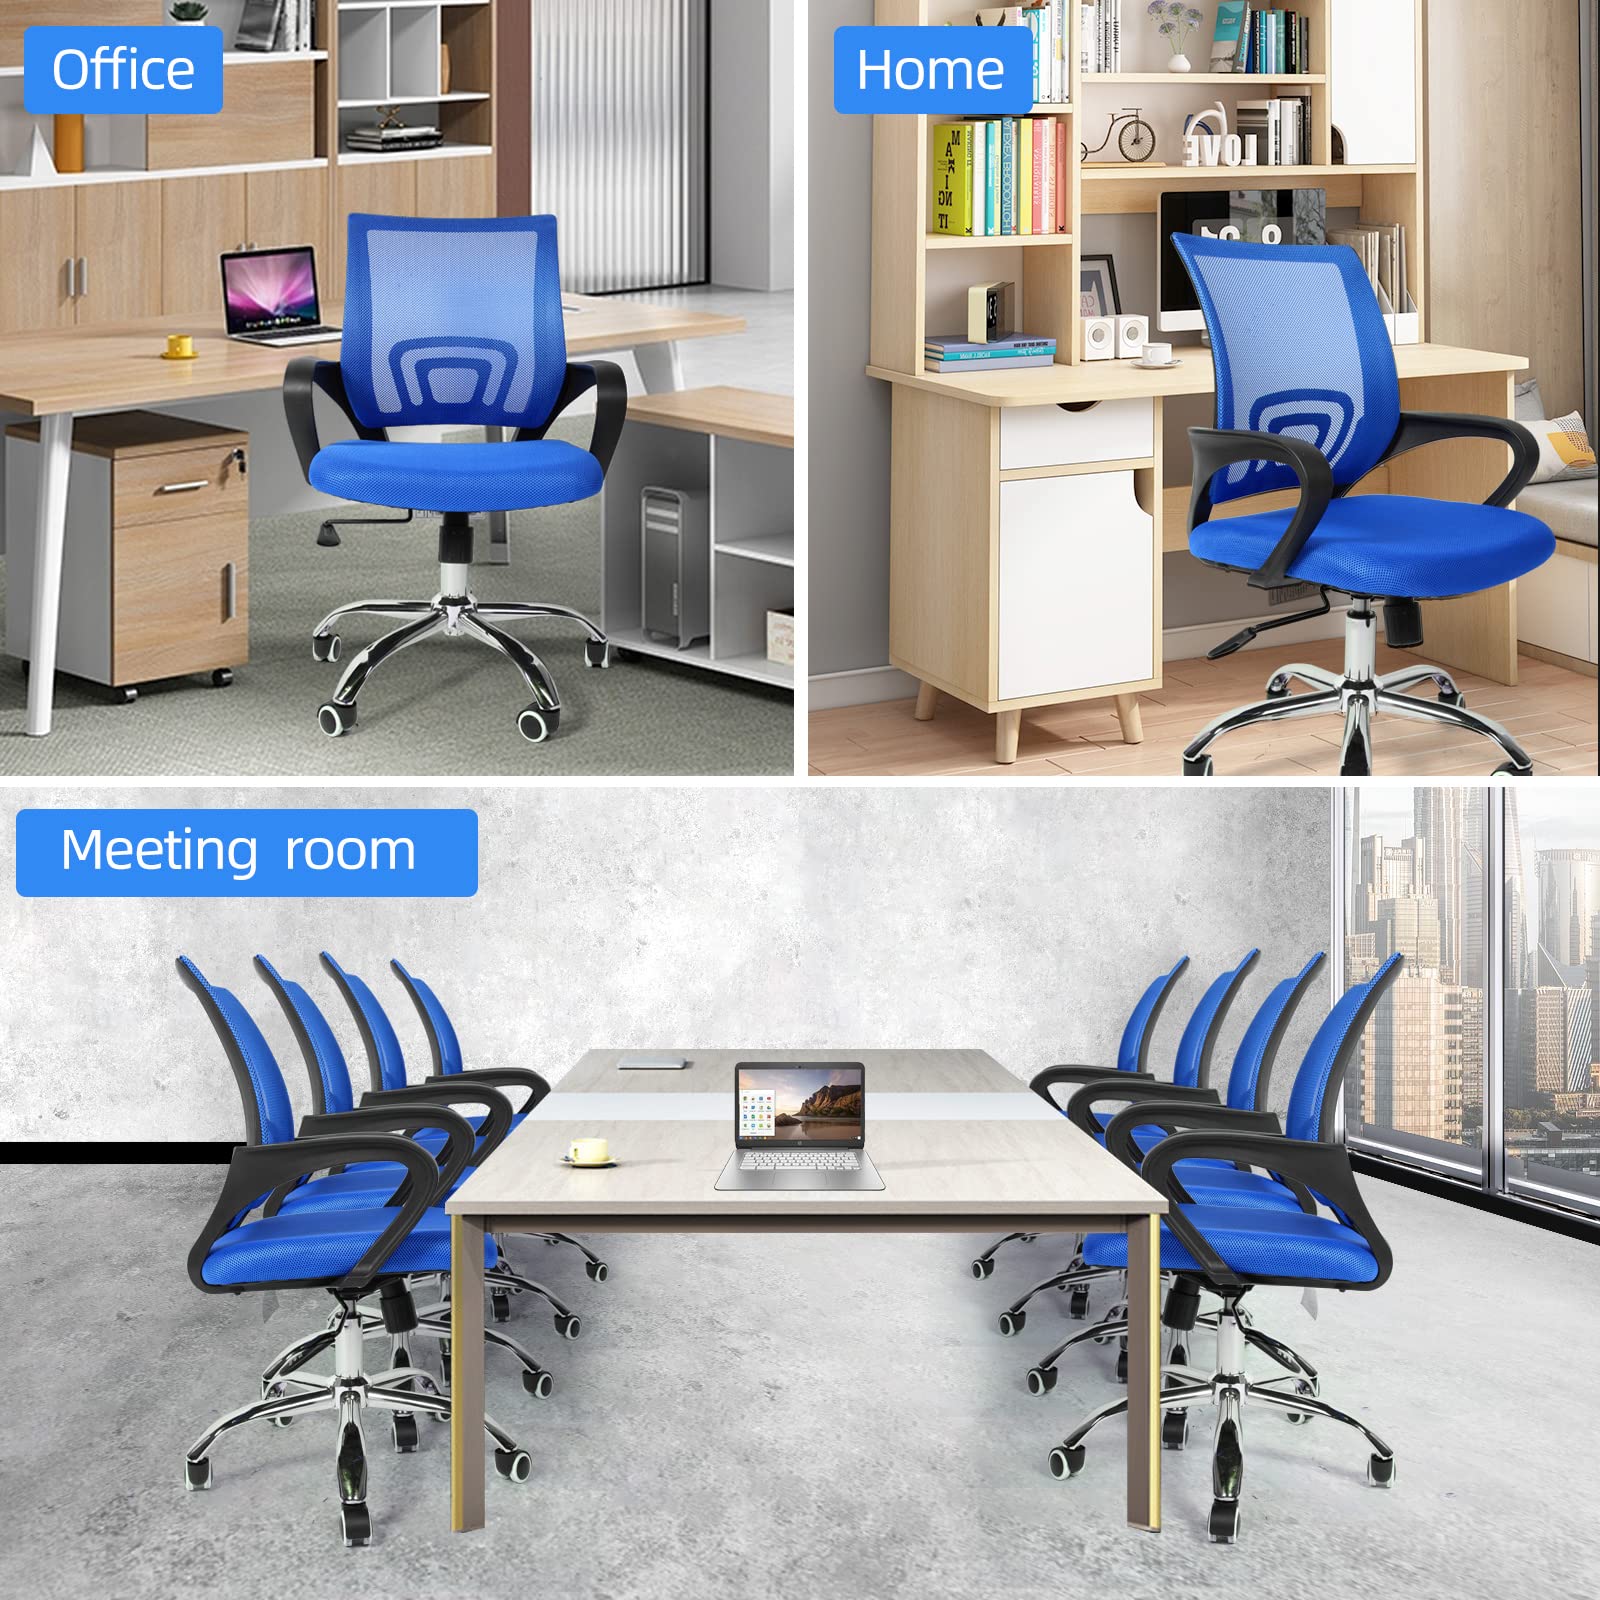 YSSOA Task Mesh Computer Wheels and Arms and Lumbar Support Study Chair for Students Teens Men Women for Dorm Home Office, Adjustable Height, Blue